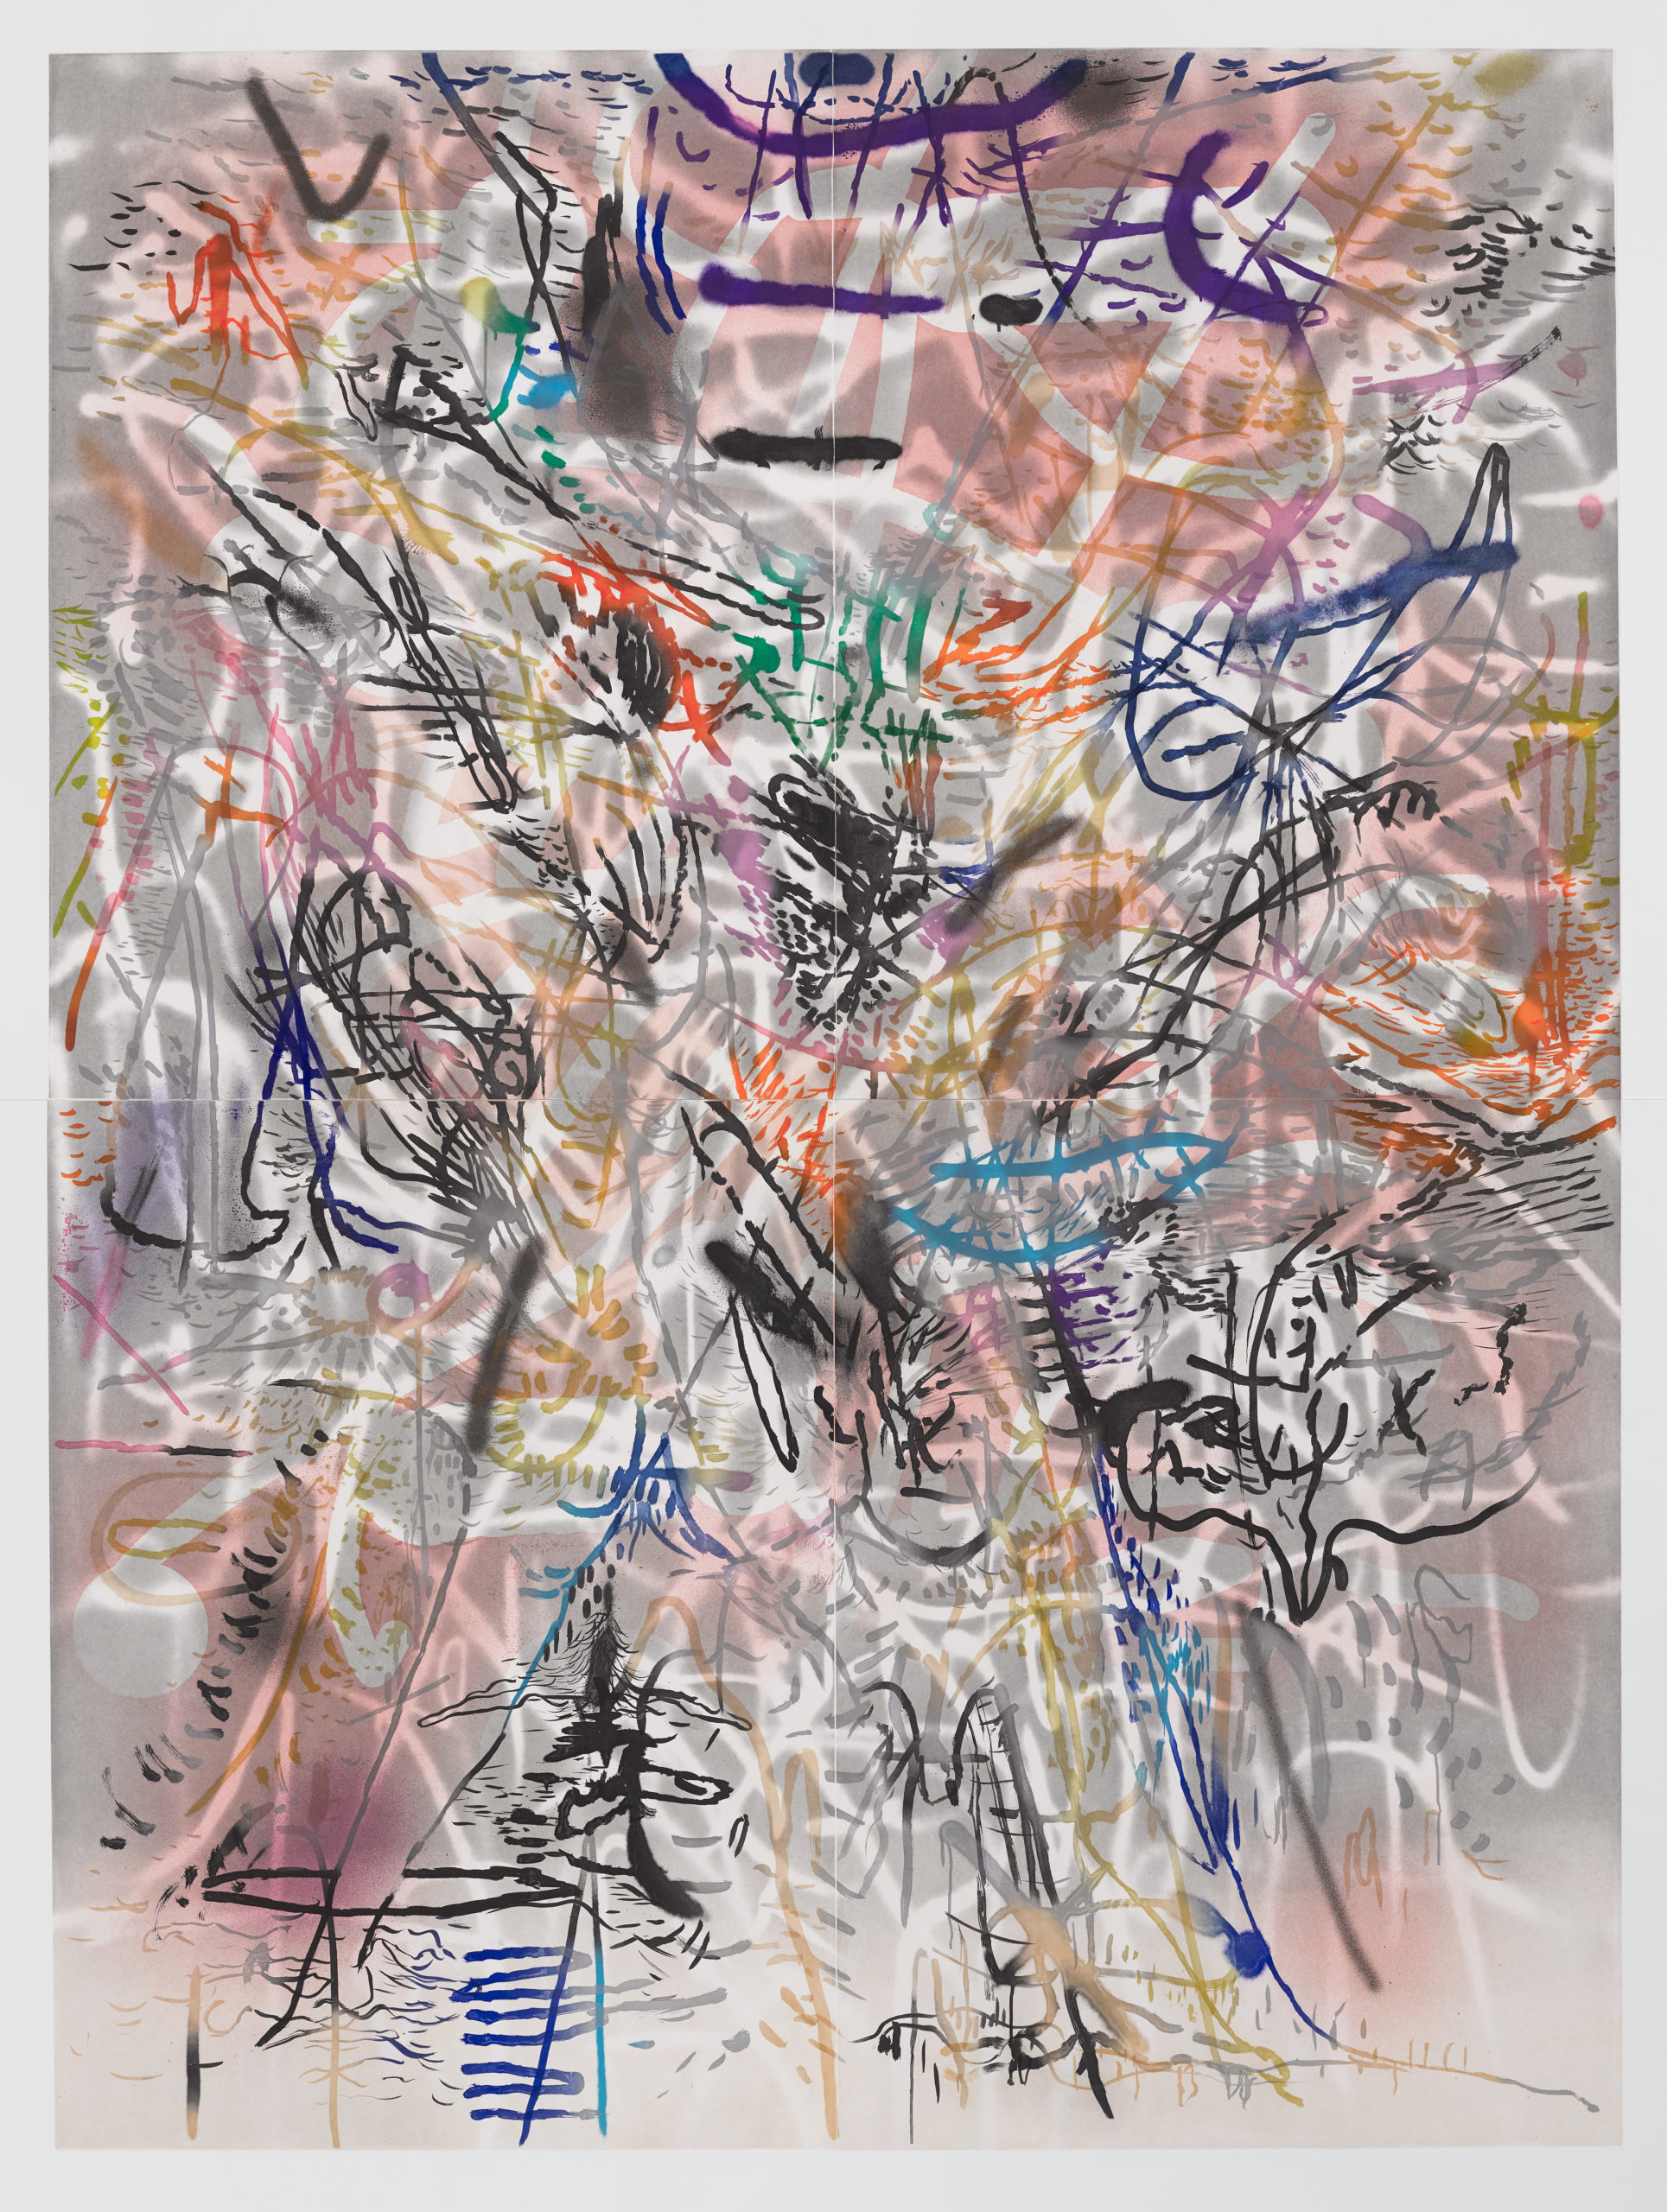 An image of a painting by Julie Mehretu